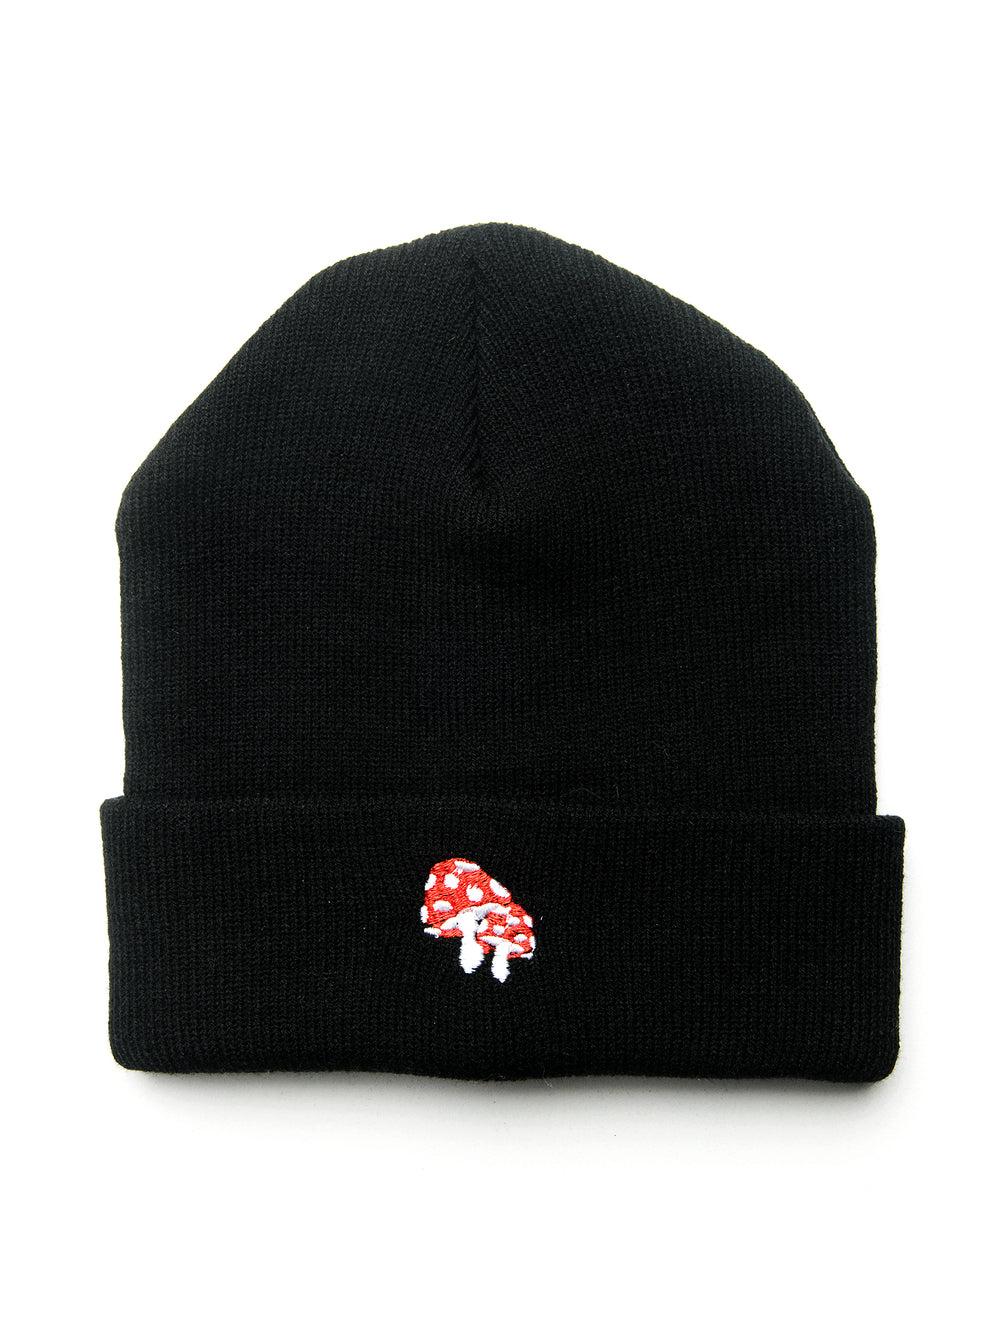 KOLBY BLACK EMBROIDERED BEANIE - CLEARANCE